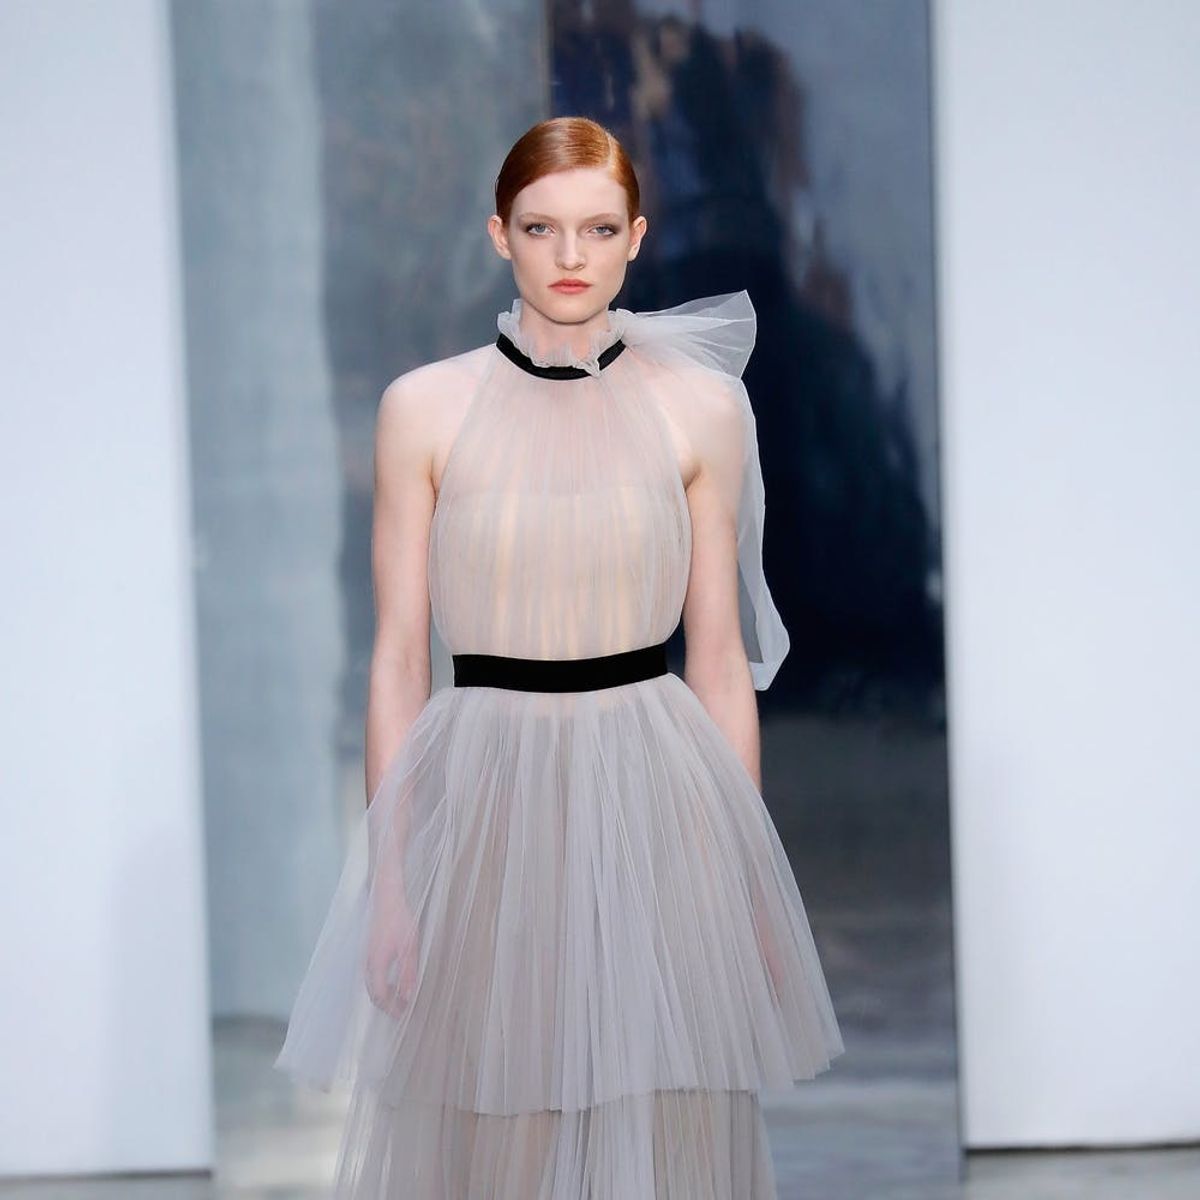 14 Runway Dresses You Could Totally Wear Down the Aisle